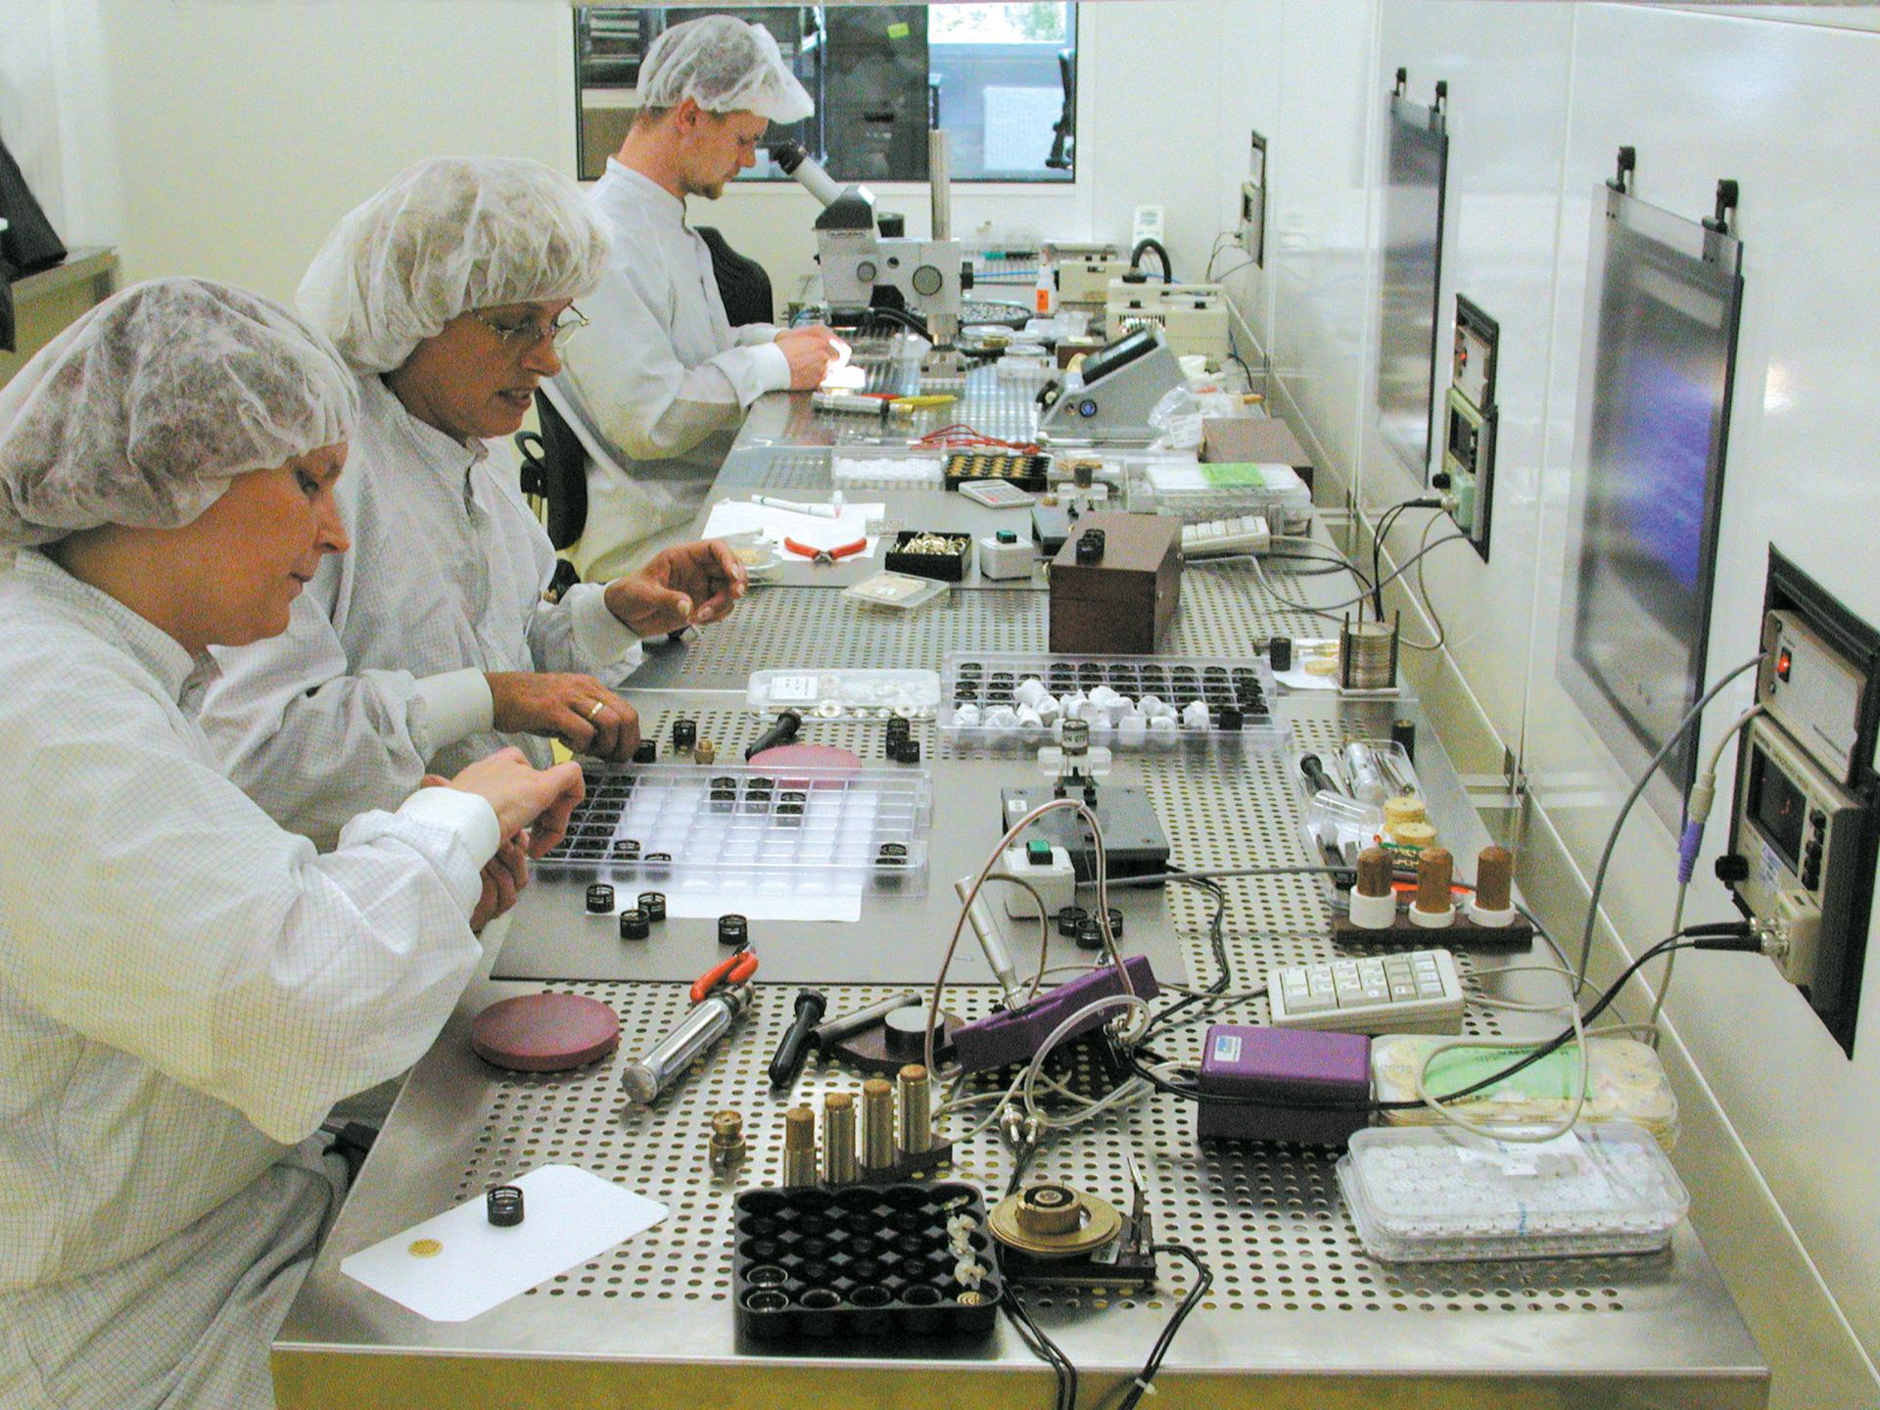 Two women and a man with smocks and hair protection sitting on a long workbench with several tools and a microscope on it 